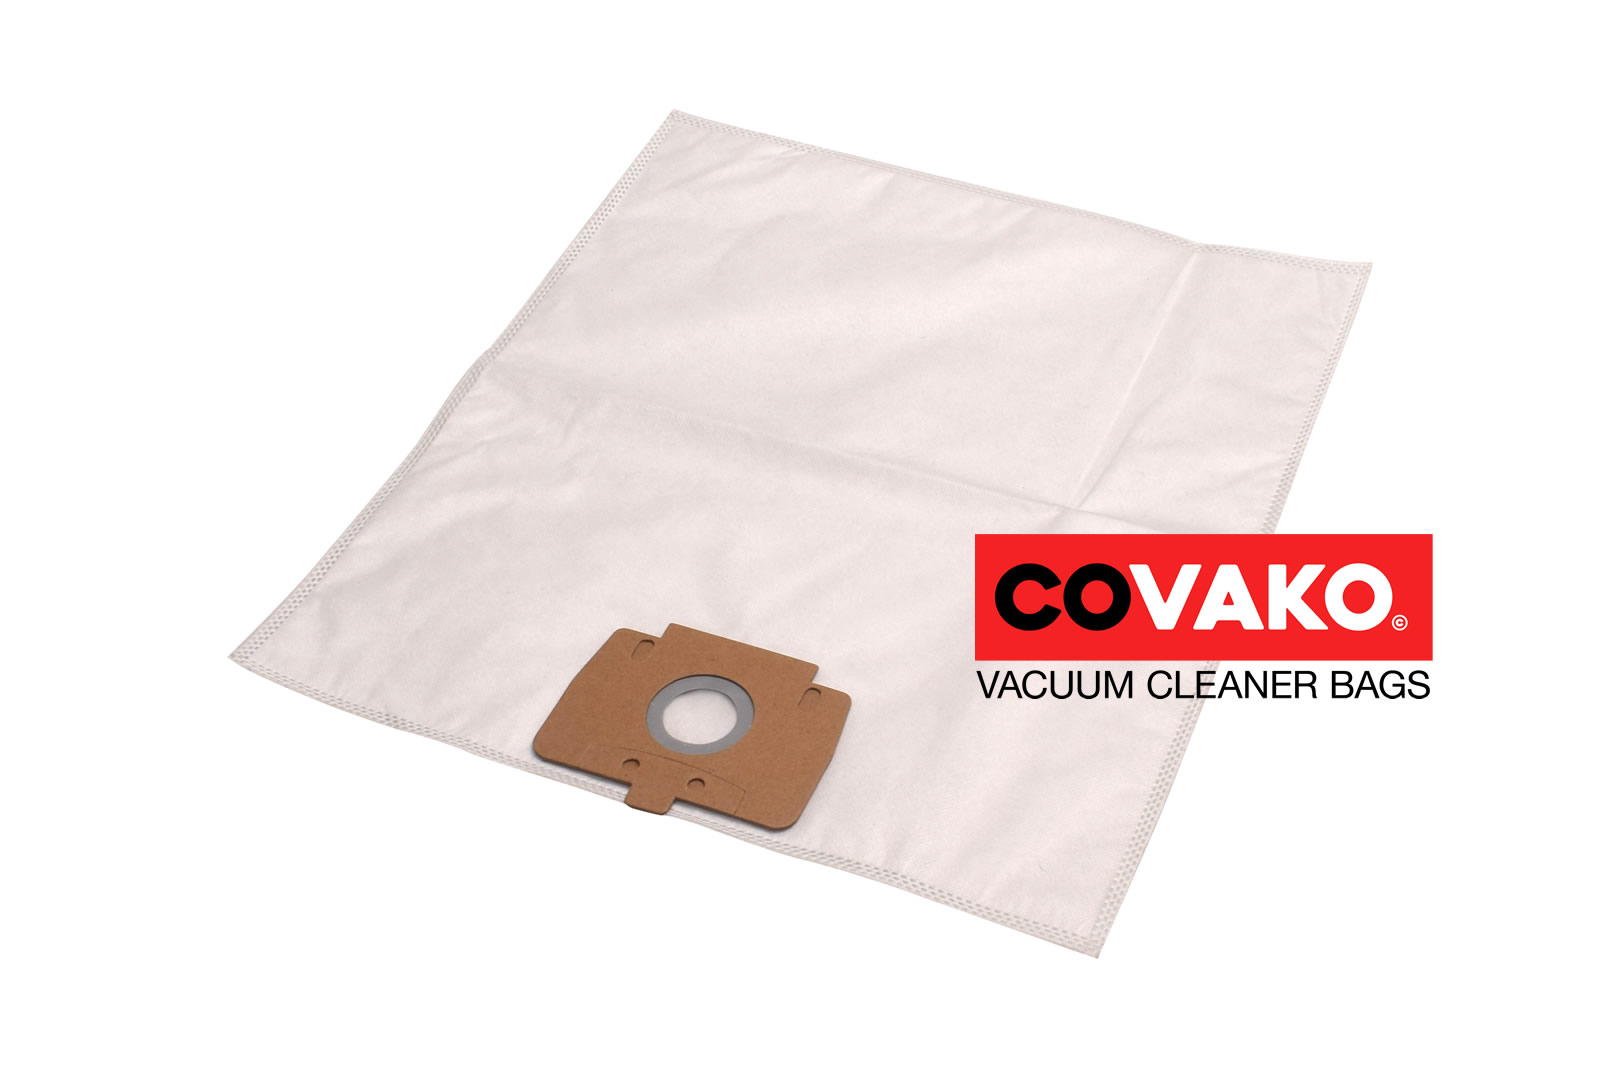 Ecolab S 12 Plus / Synthesis - Ecolab vacuum cleaner bags